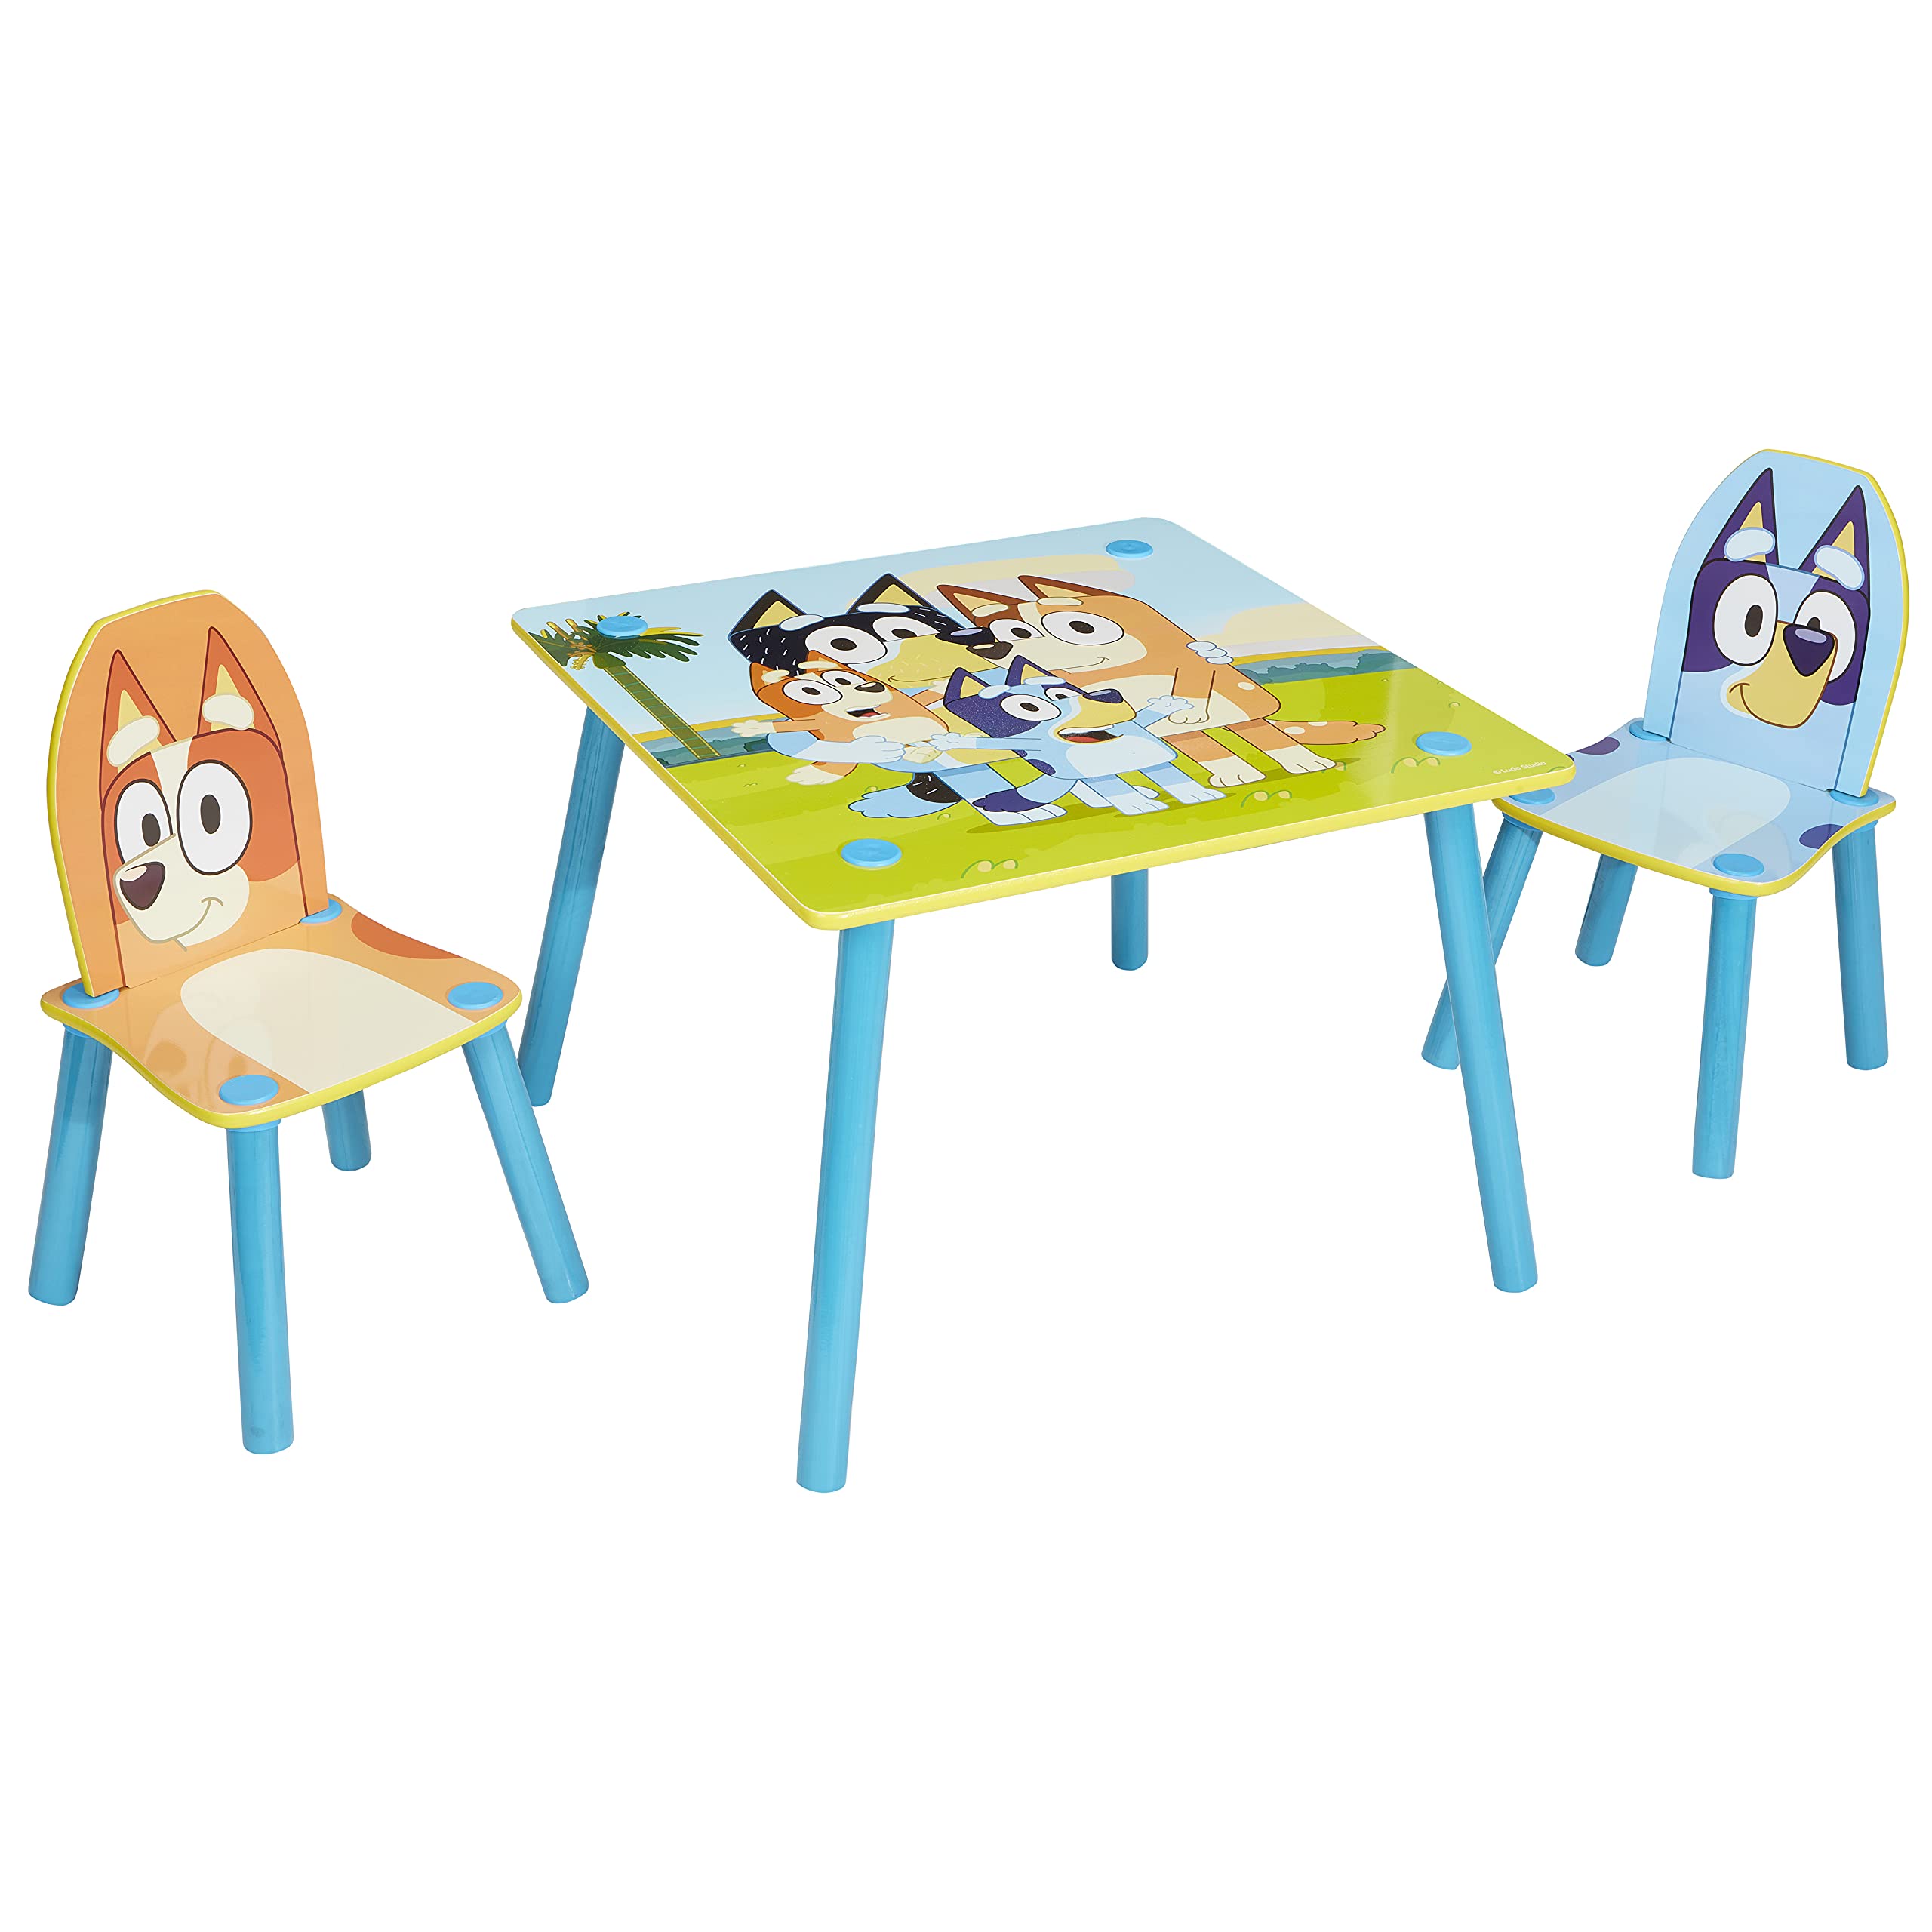 Bluey Furniture - Includes Table and 2 chairs - Perfect for Arts & crafts, Multi color